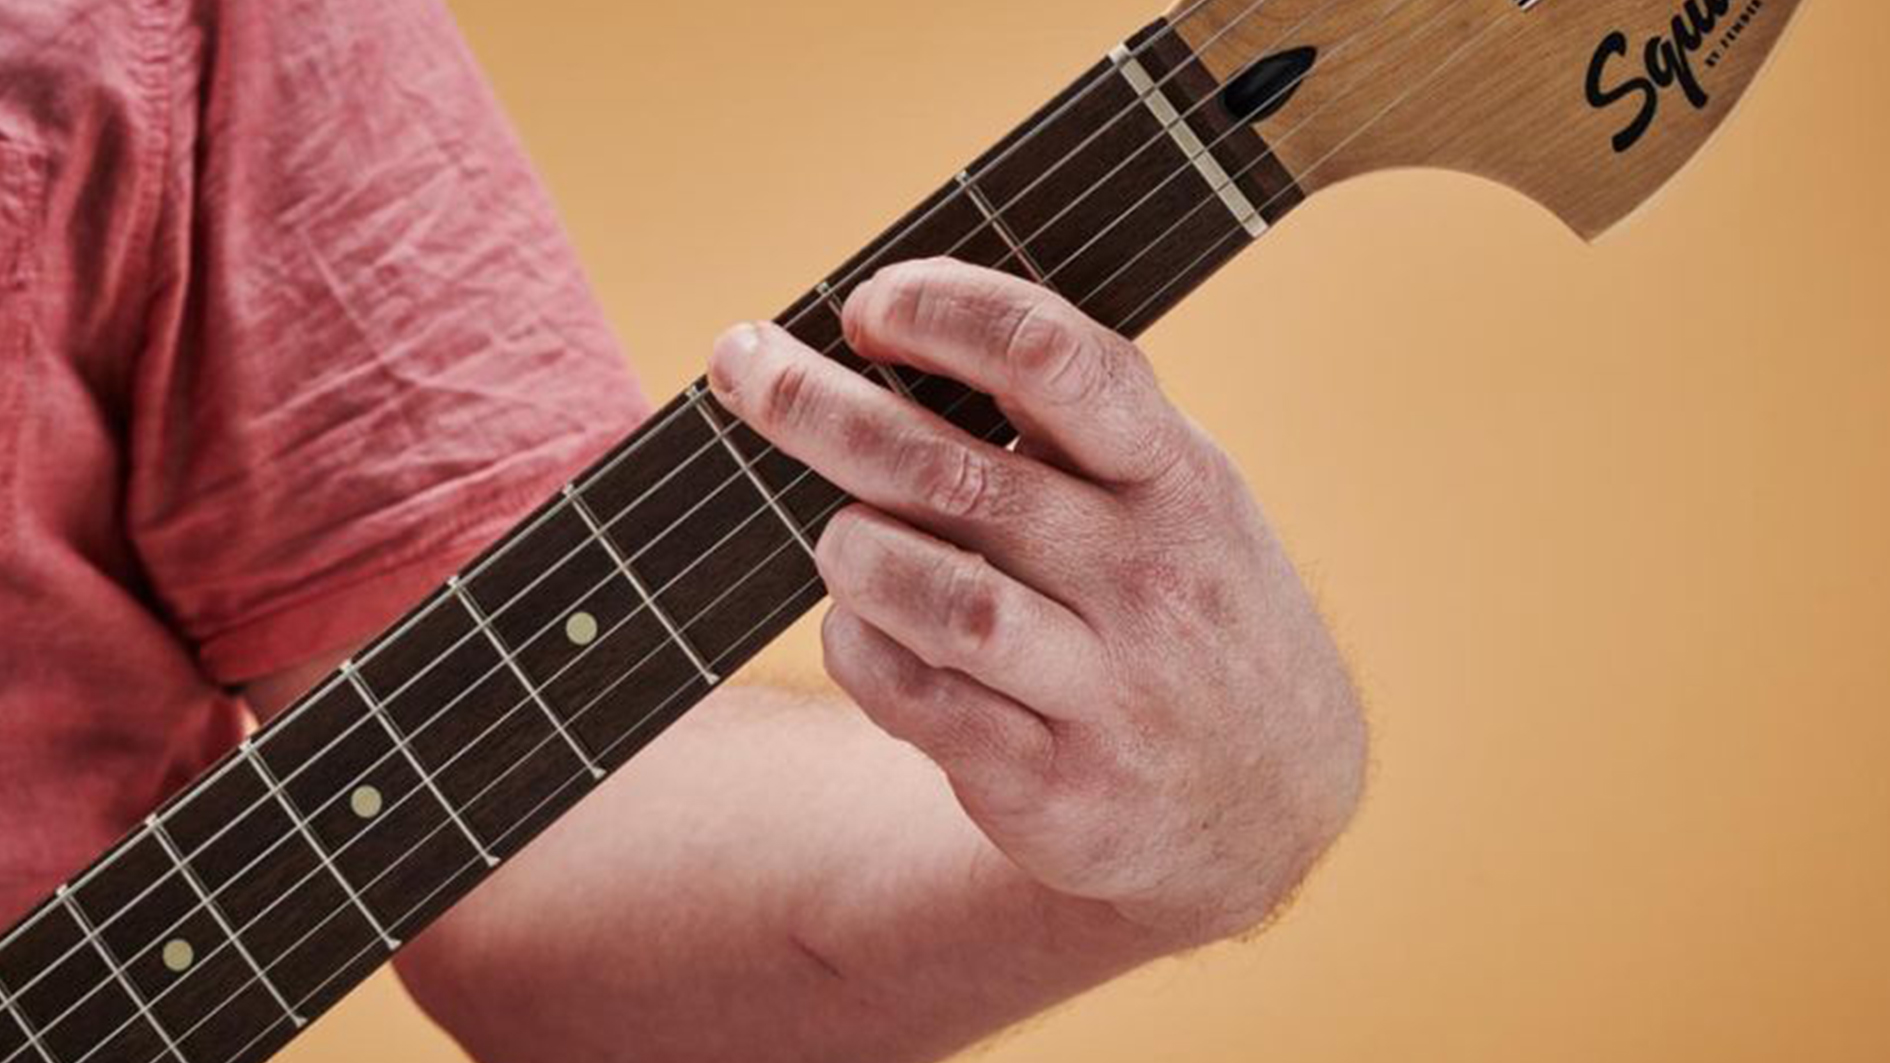 How to play the G chord on guitar